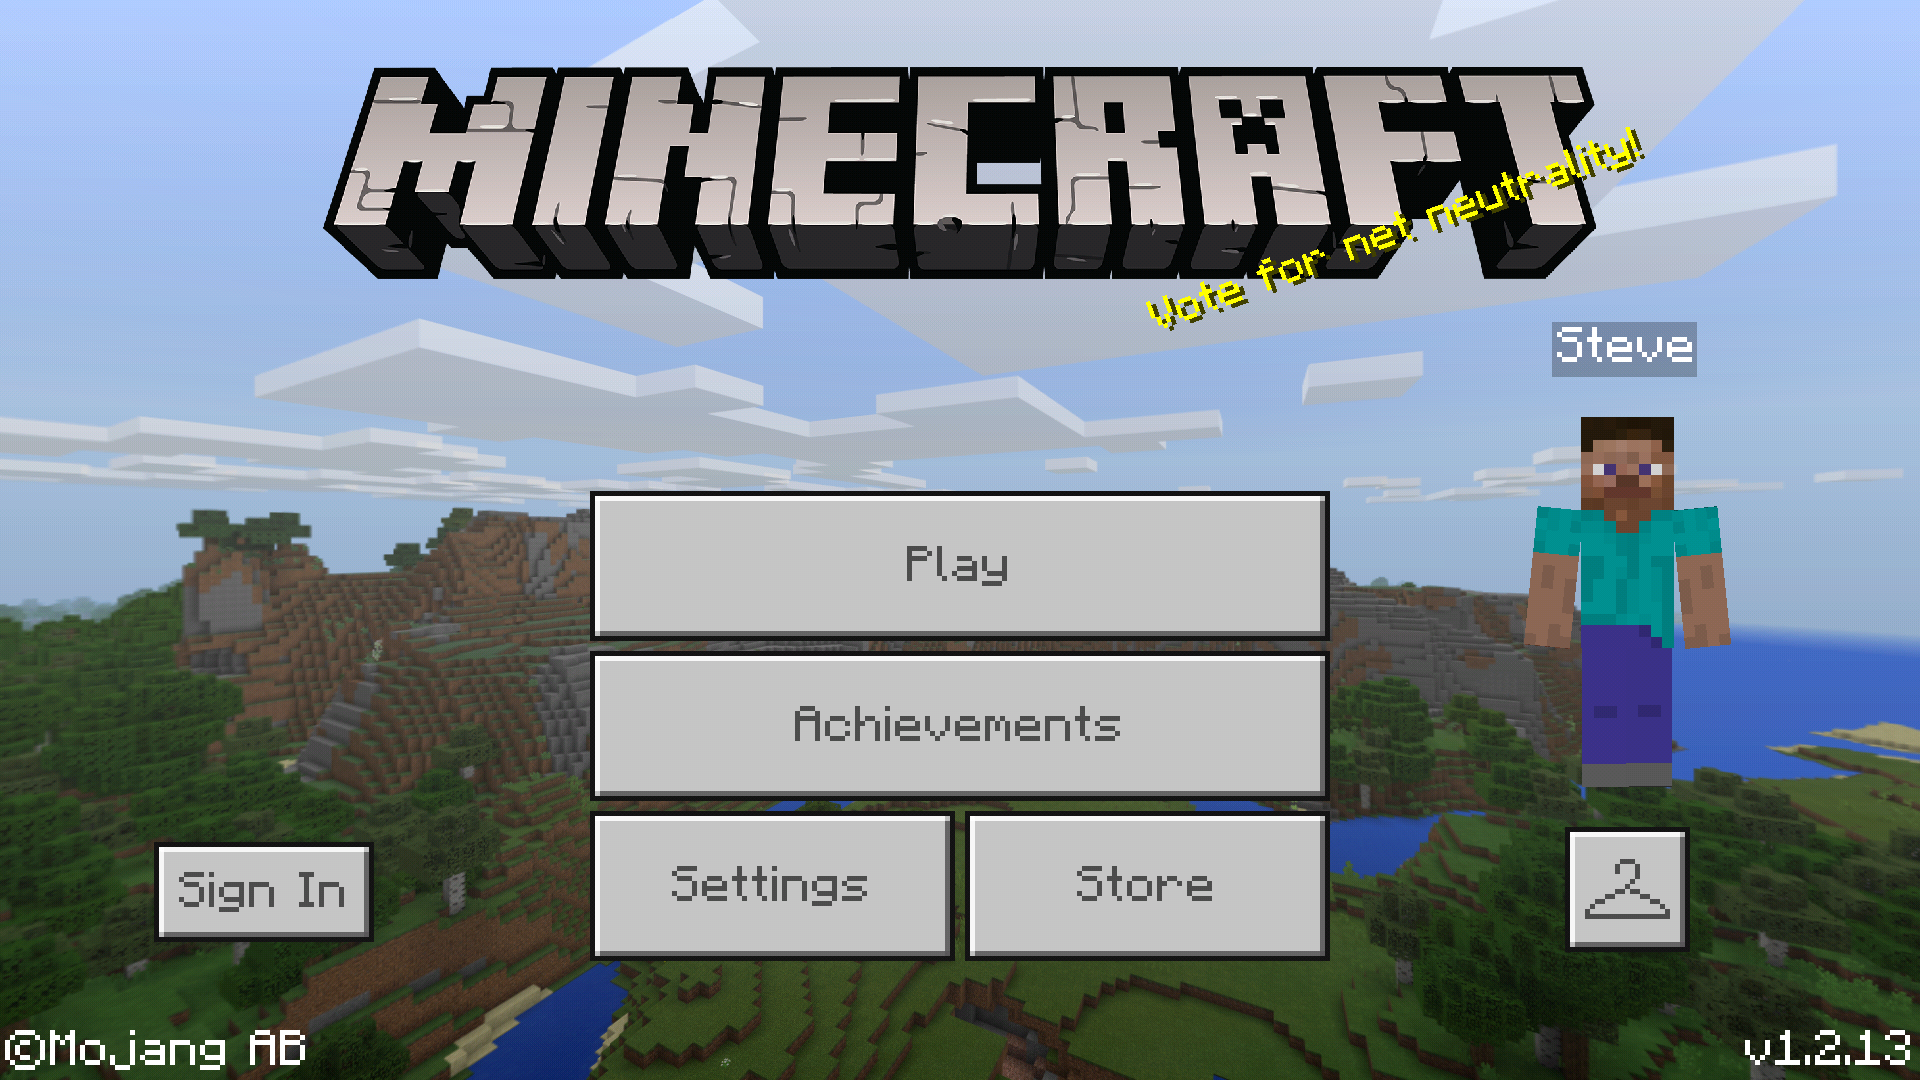 Minecraft Pocket Edition for Android mobile devices $4 (Save 42%)